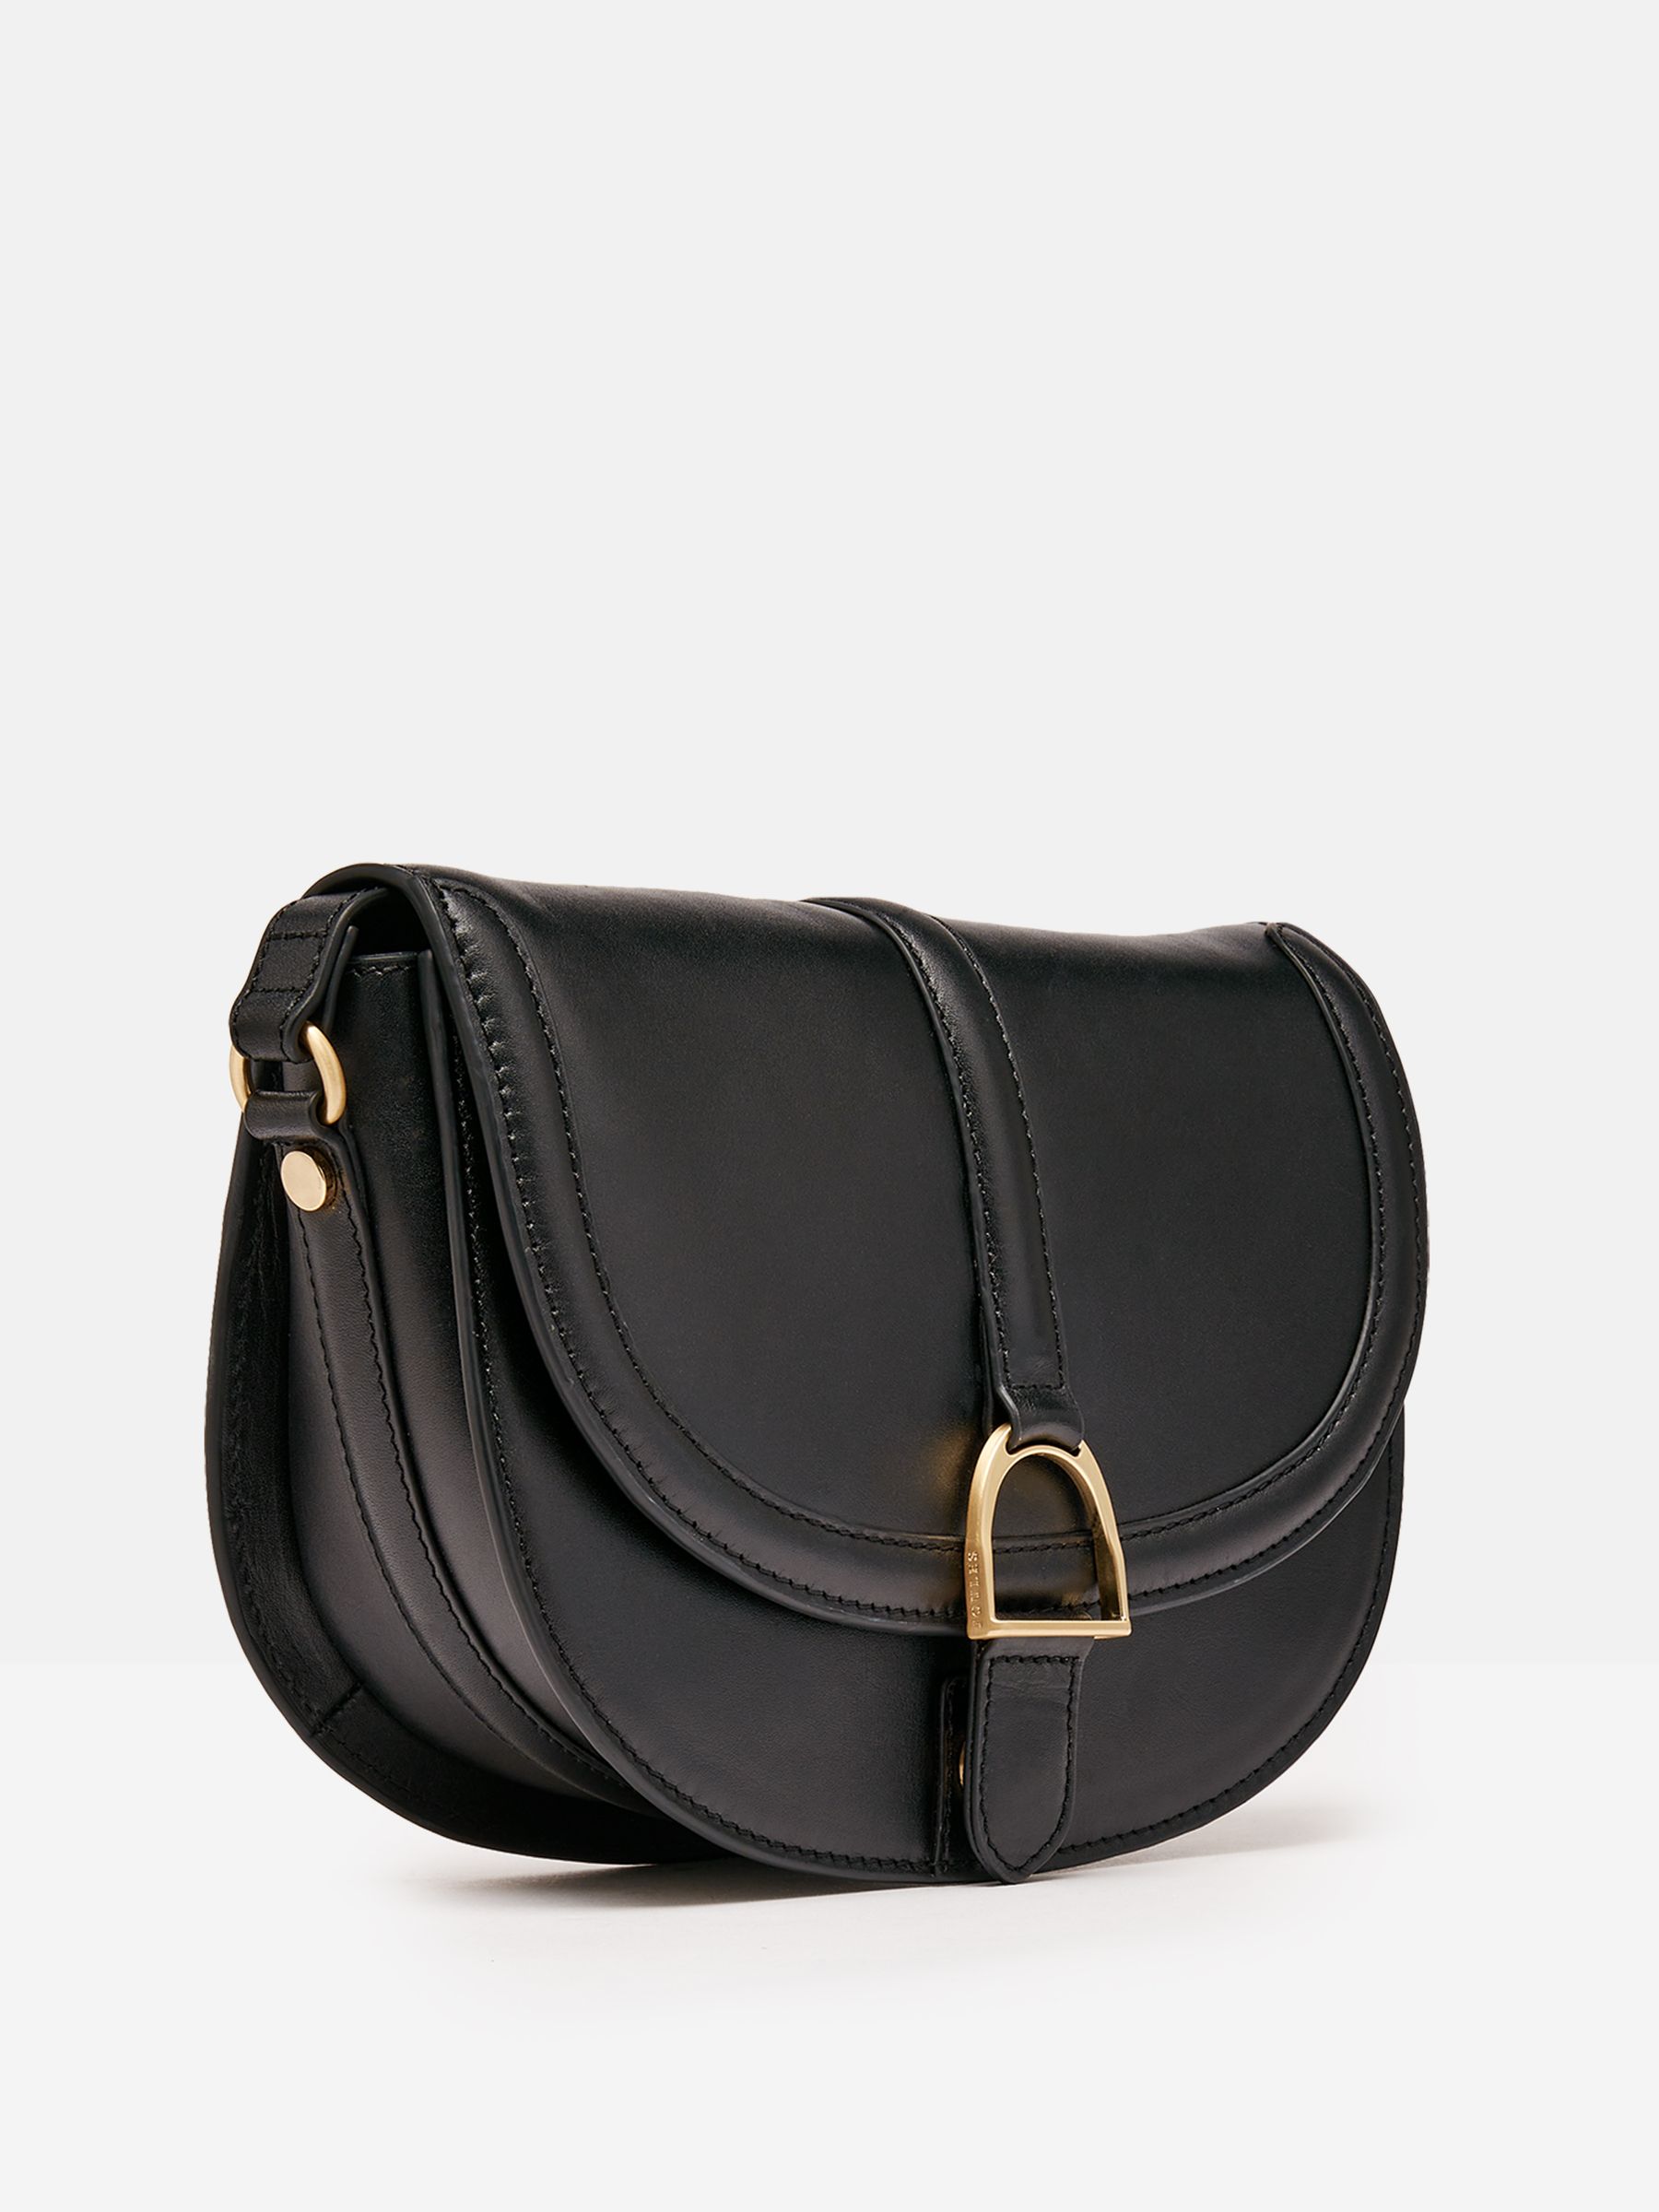 Buy Joules Soft Leather Cross Body Bag from the Joules online shop